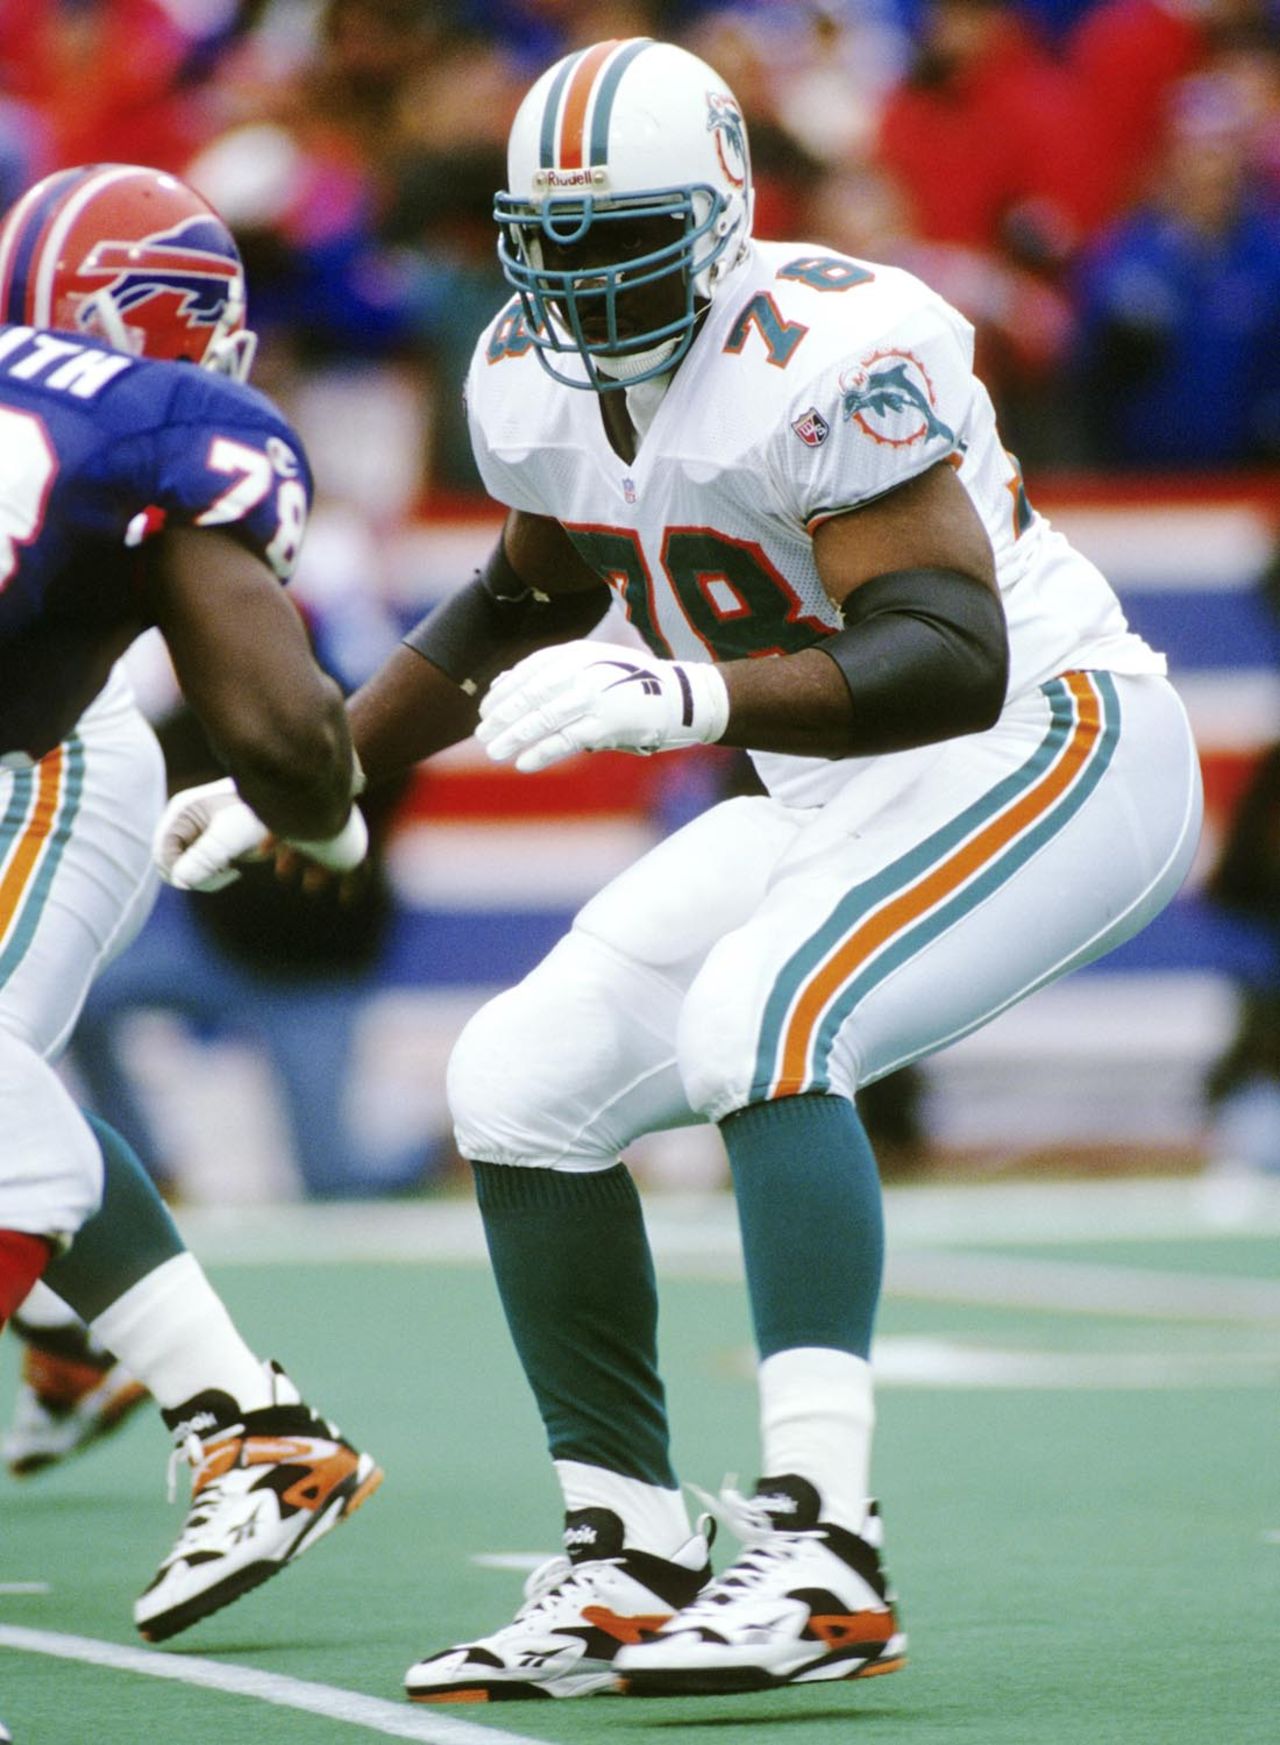 Former Dolphins Pro Bowl Tackle Richmond Webb shares stories from his playing days plus insights on the Dolphins draft and his alma mater Texas A&M on this segment of Thursday Night Tailgate.